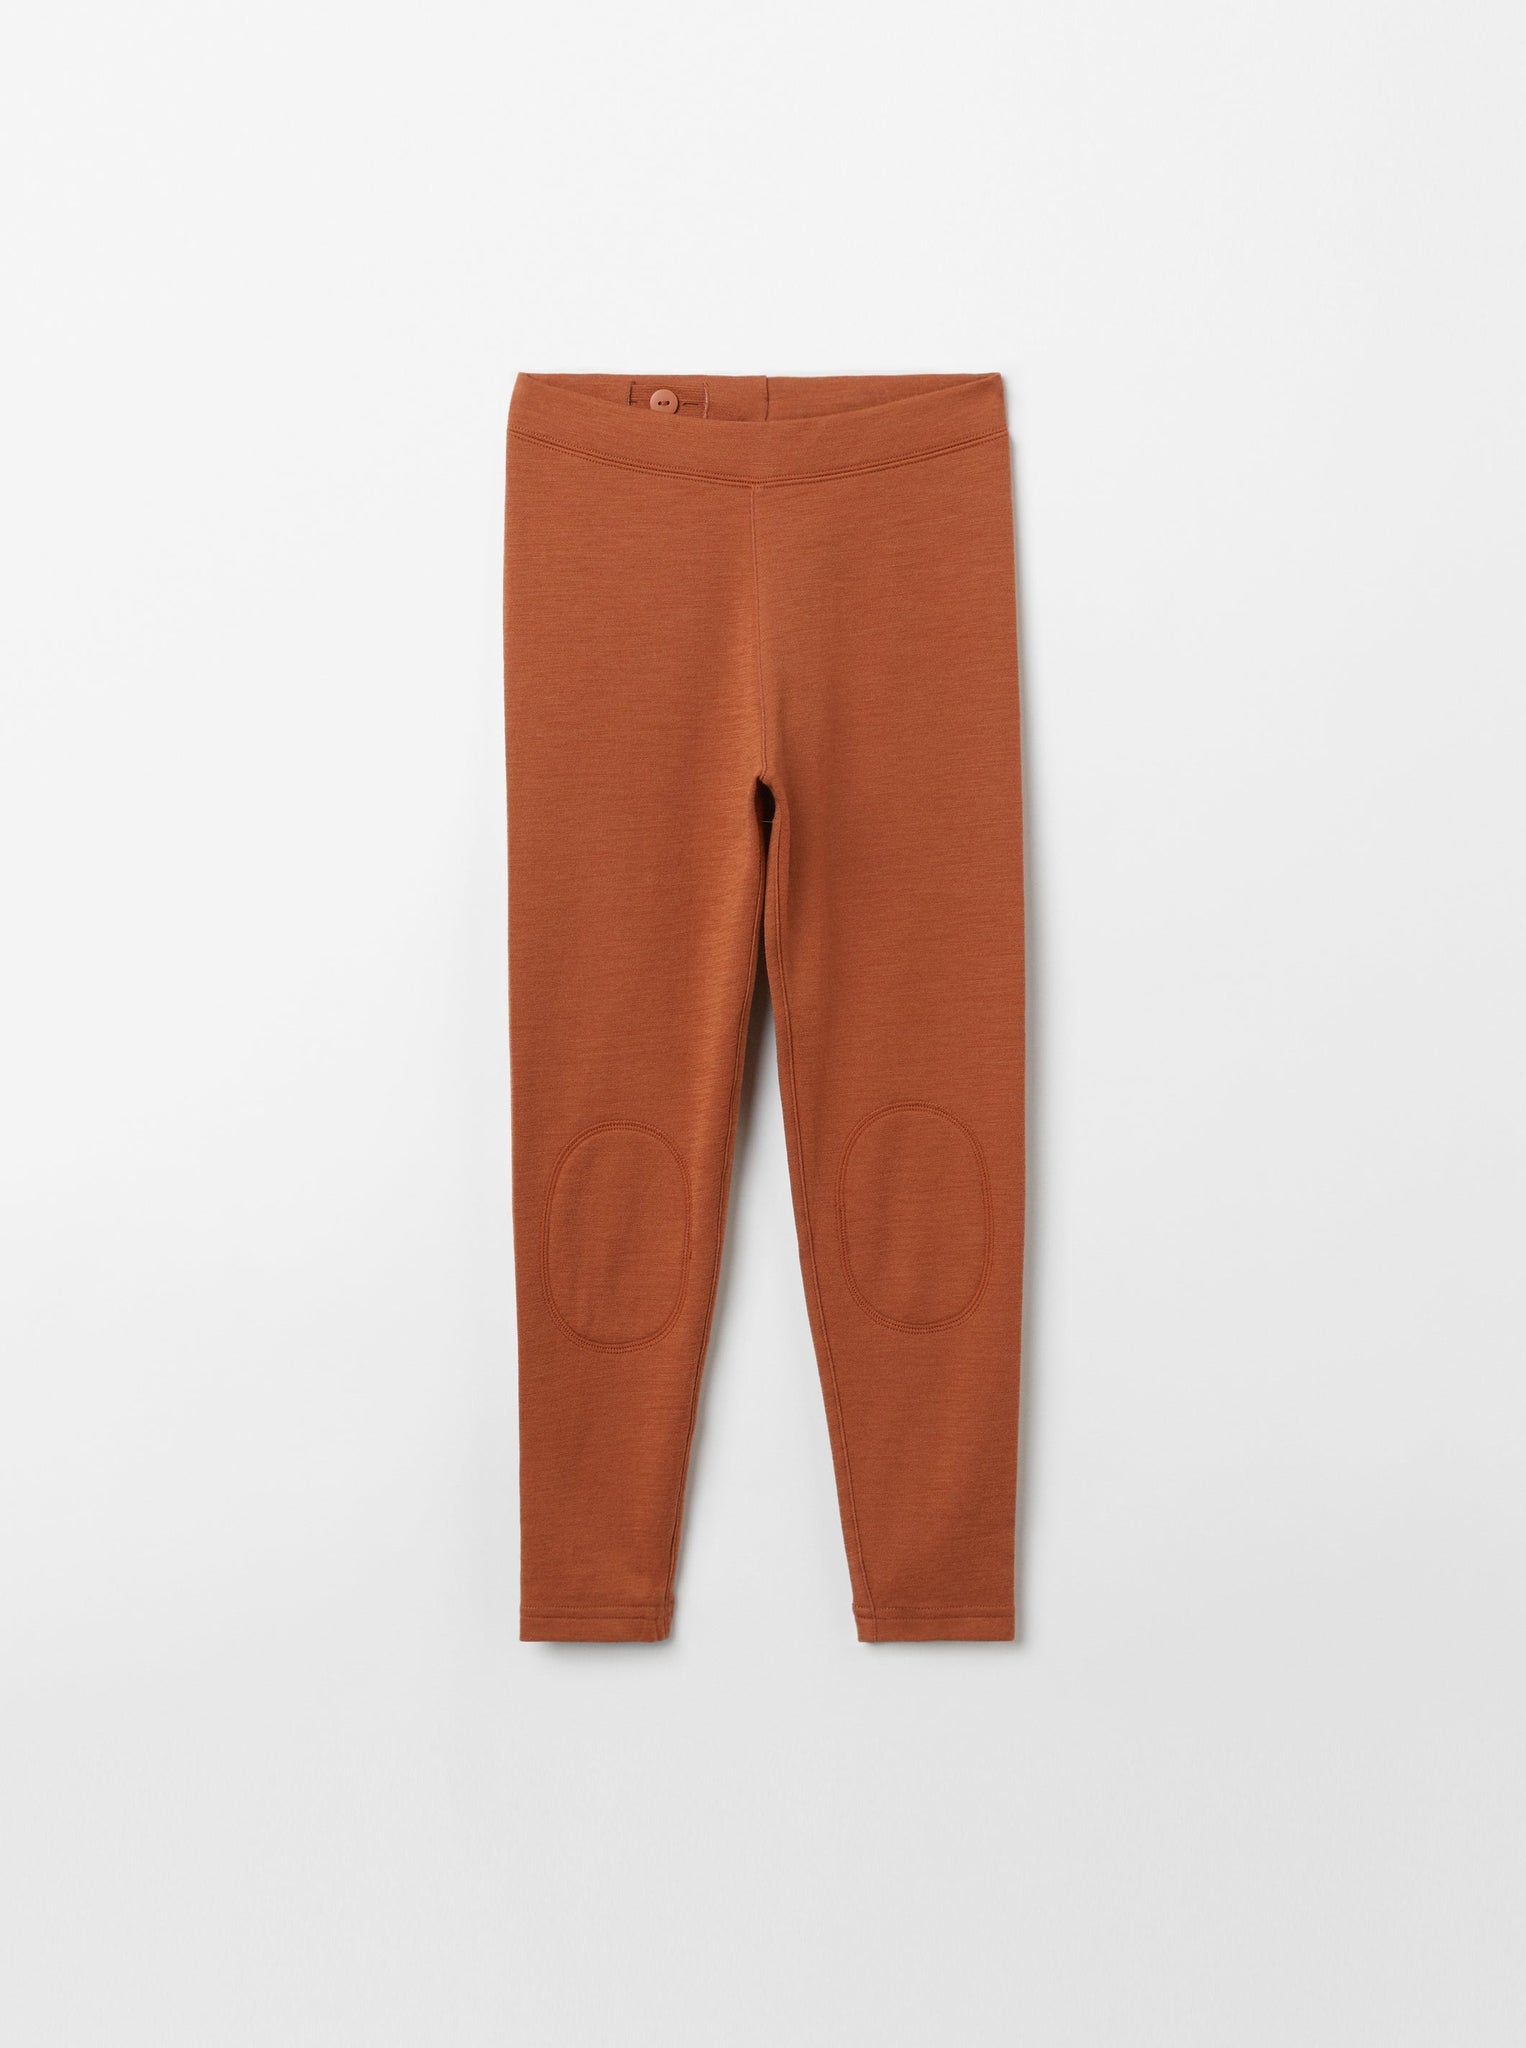 Merino Wool Orange Kids Leggings from the Polarn O. Pyret kidswear collection. Clothes made using sustainably sourced materials.